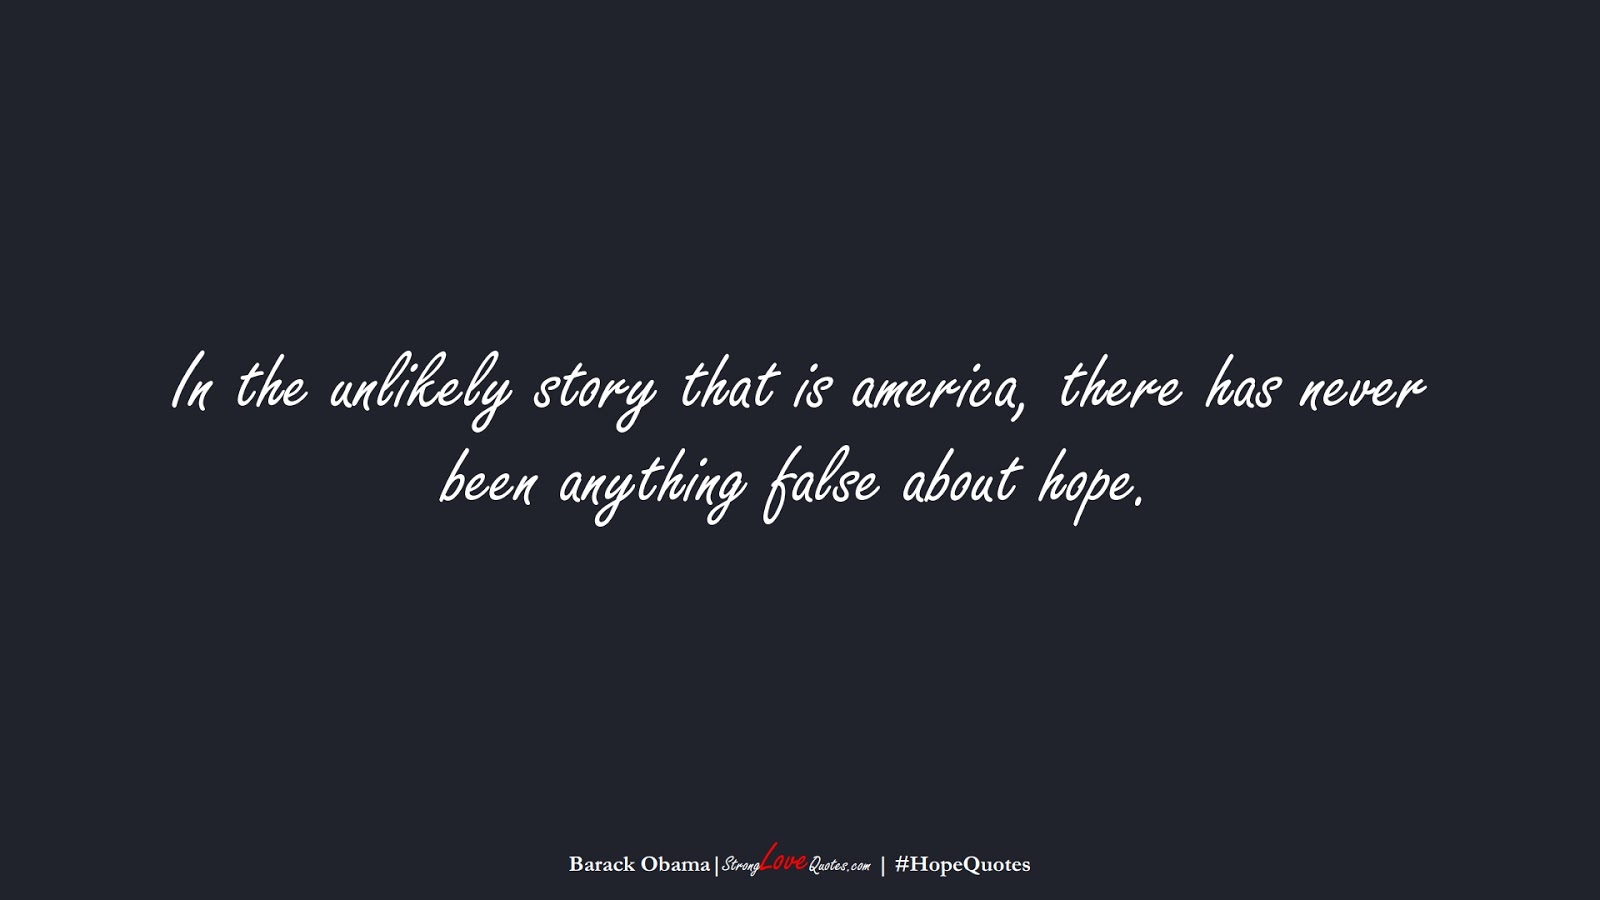 In the unlikely story that is america, there has never been anything false about hope. (Barack Obama);  #HopeQuotes